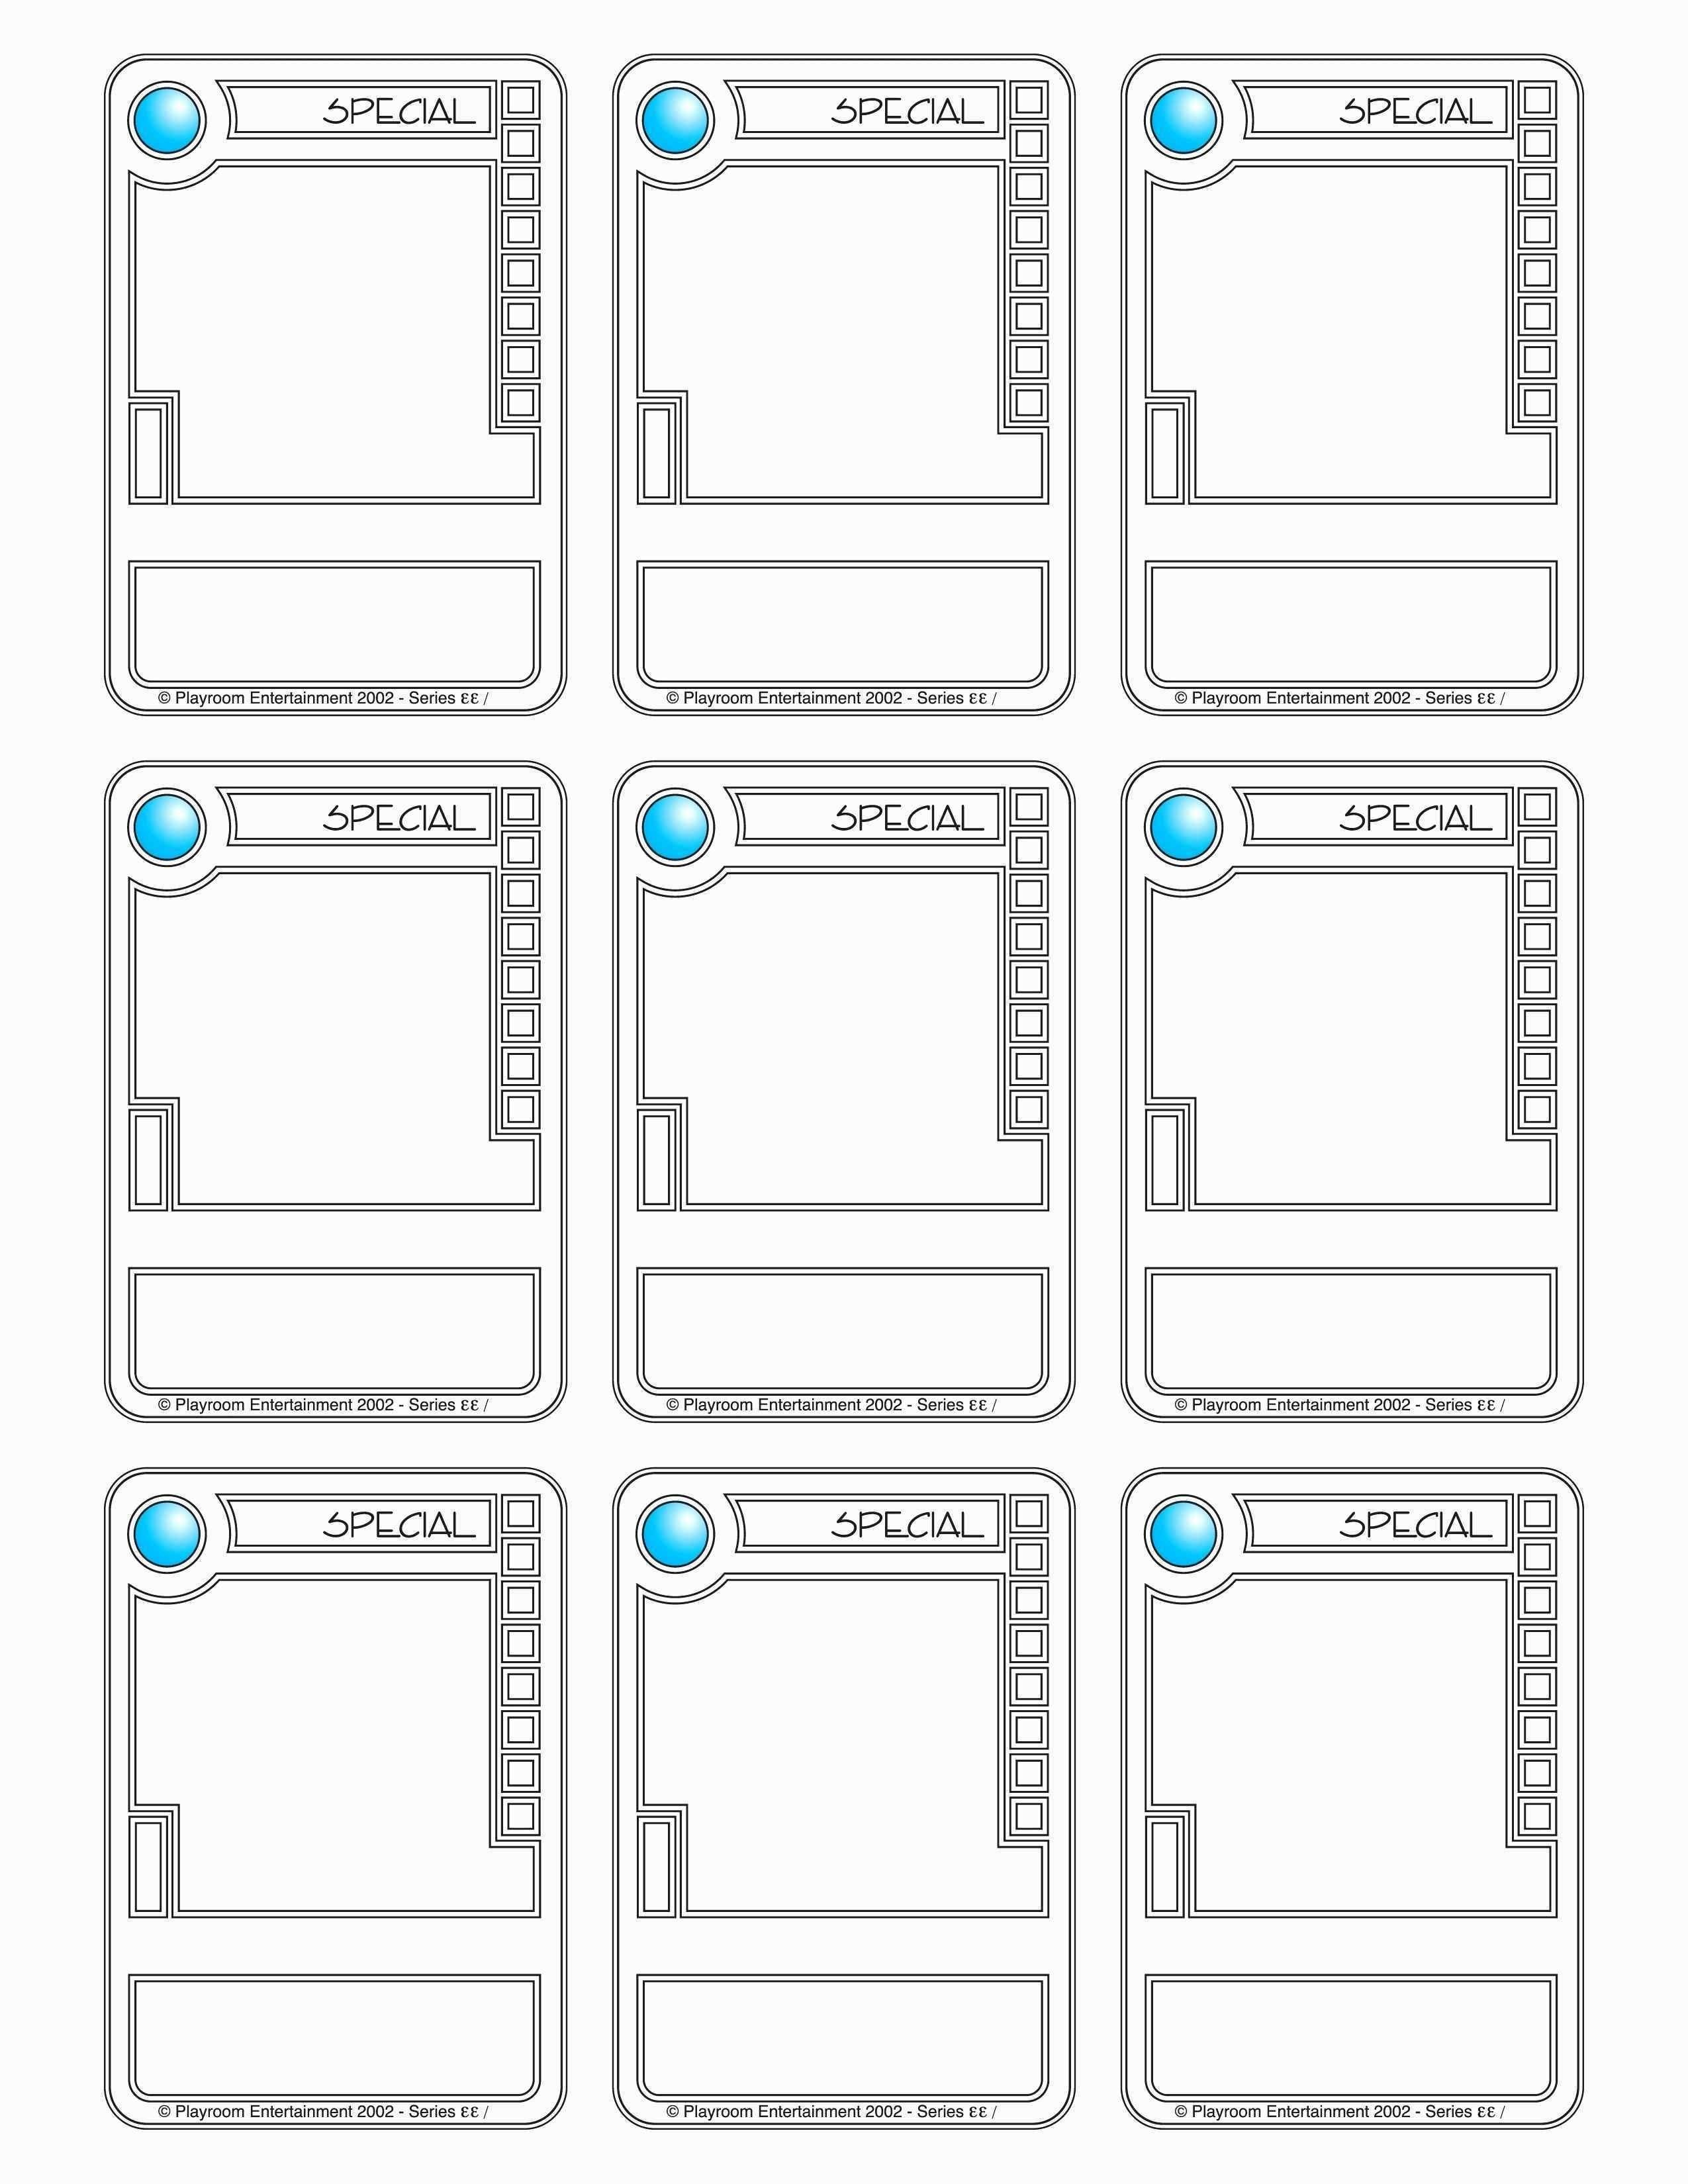 Trading Card Template   Payroll Check Stubs with regard to Trading Card Template Word